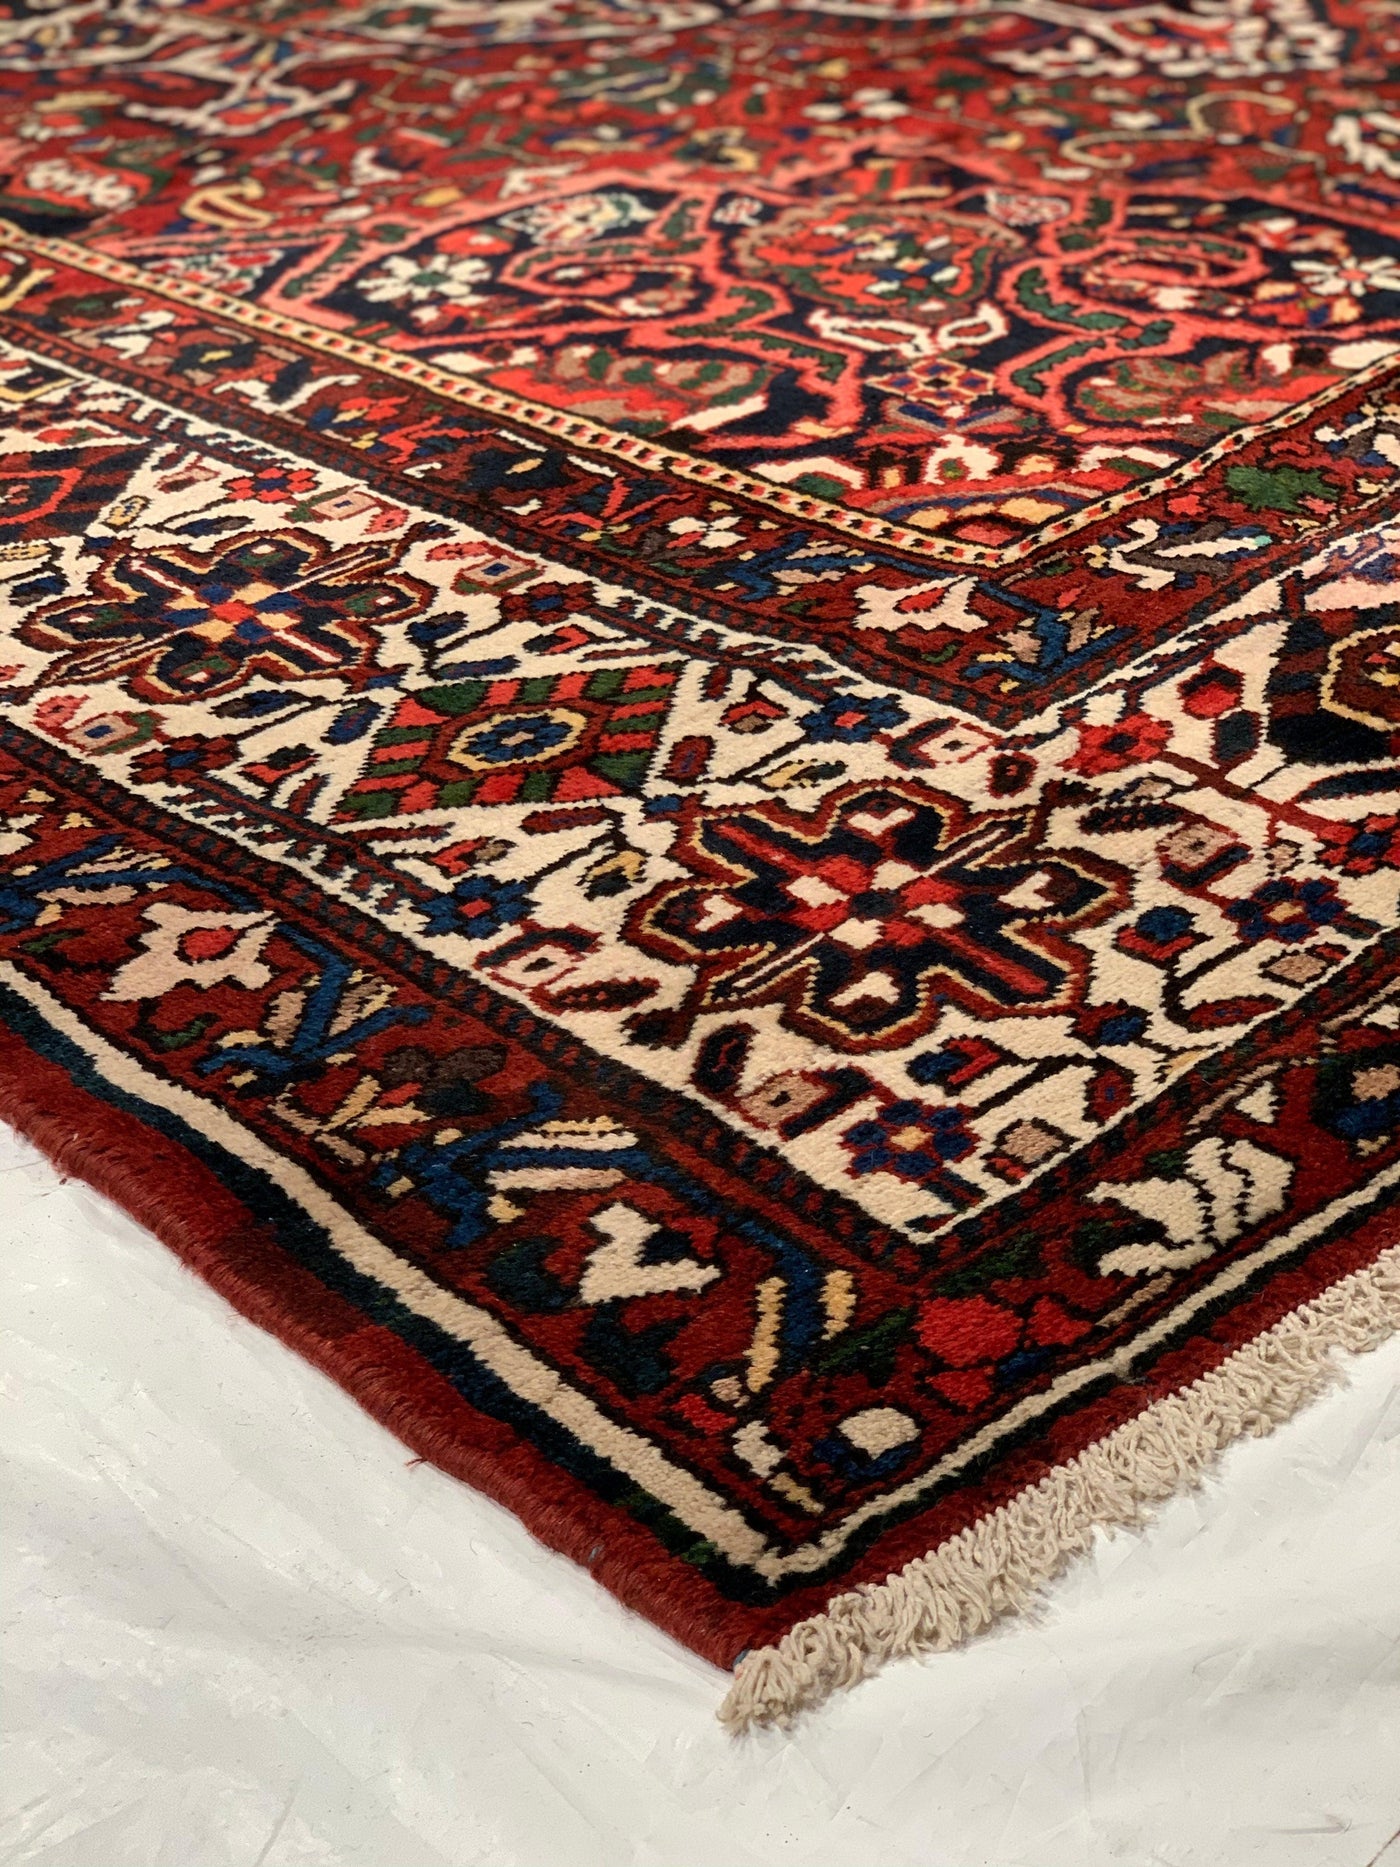 Canvello Persian Bakhtiari Hand-Knotted Antique Rug -11'2'' X 15'